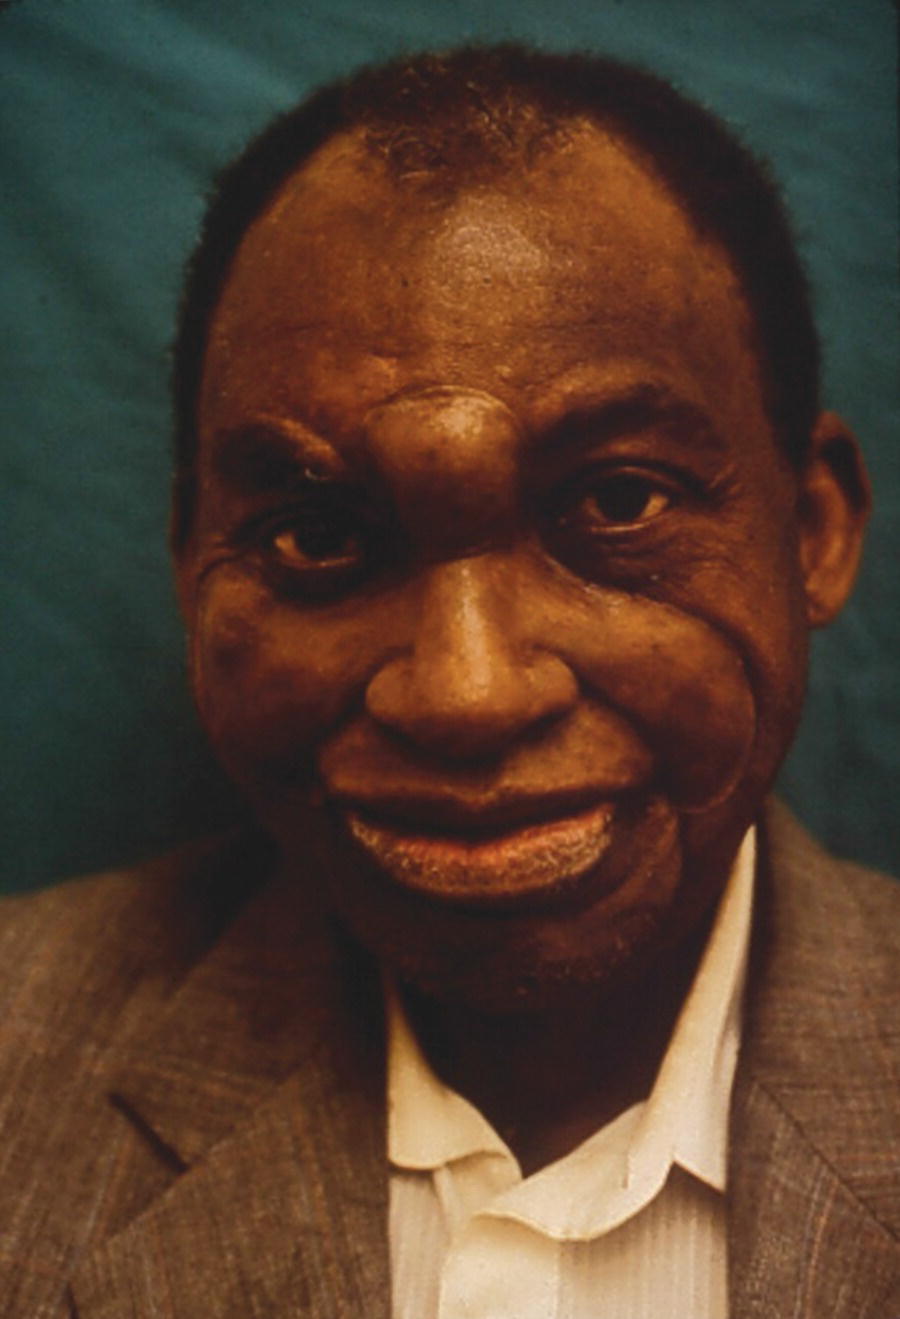 Photo of a man wearing full facial prosthesis.